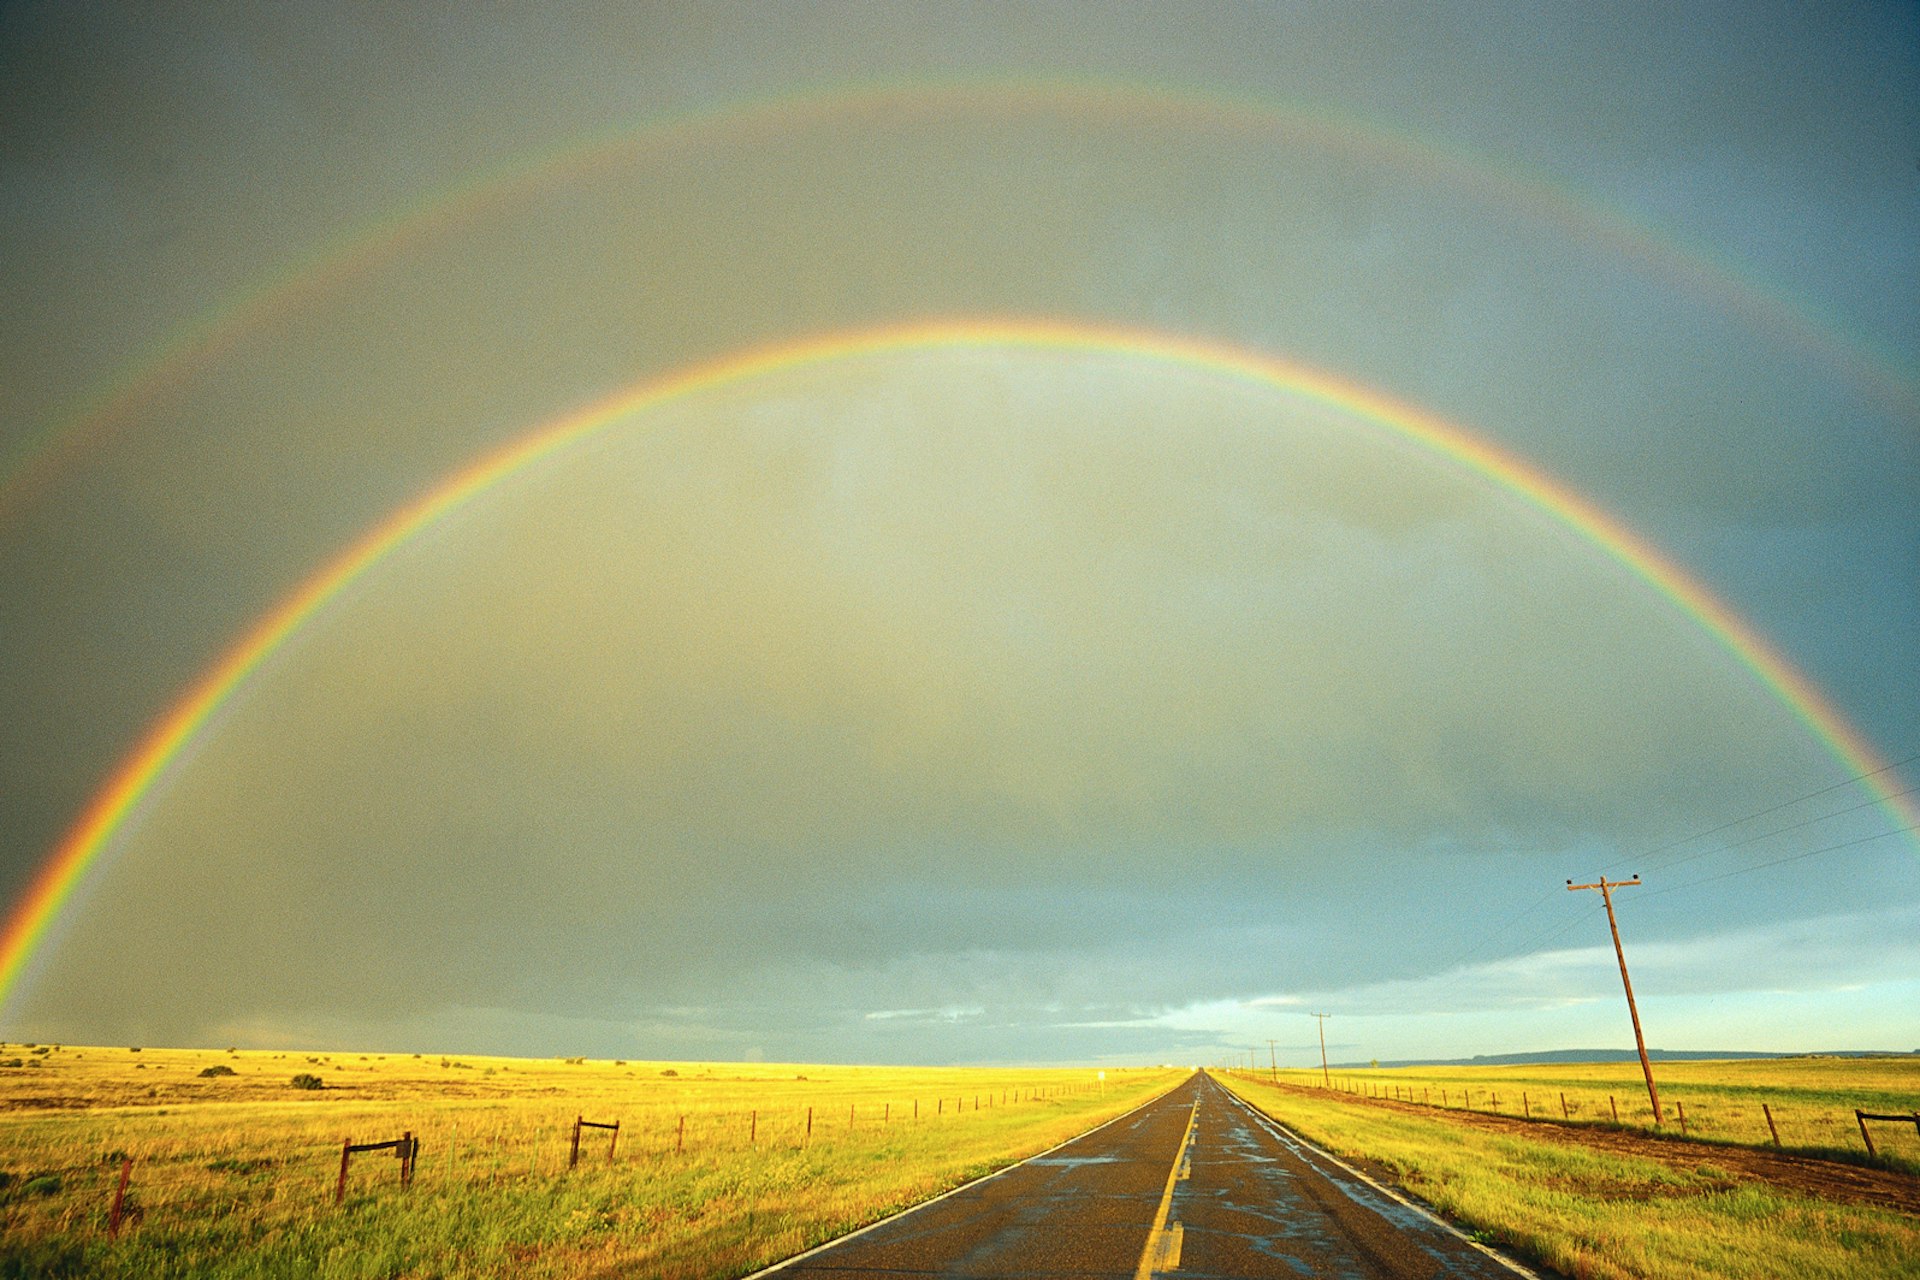 A rainbow stretches over a country road in Kansas